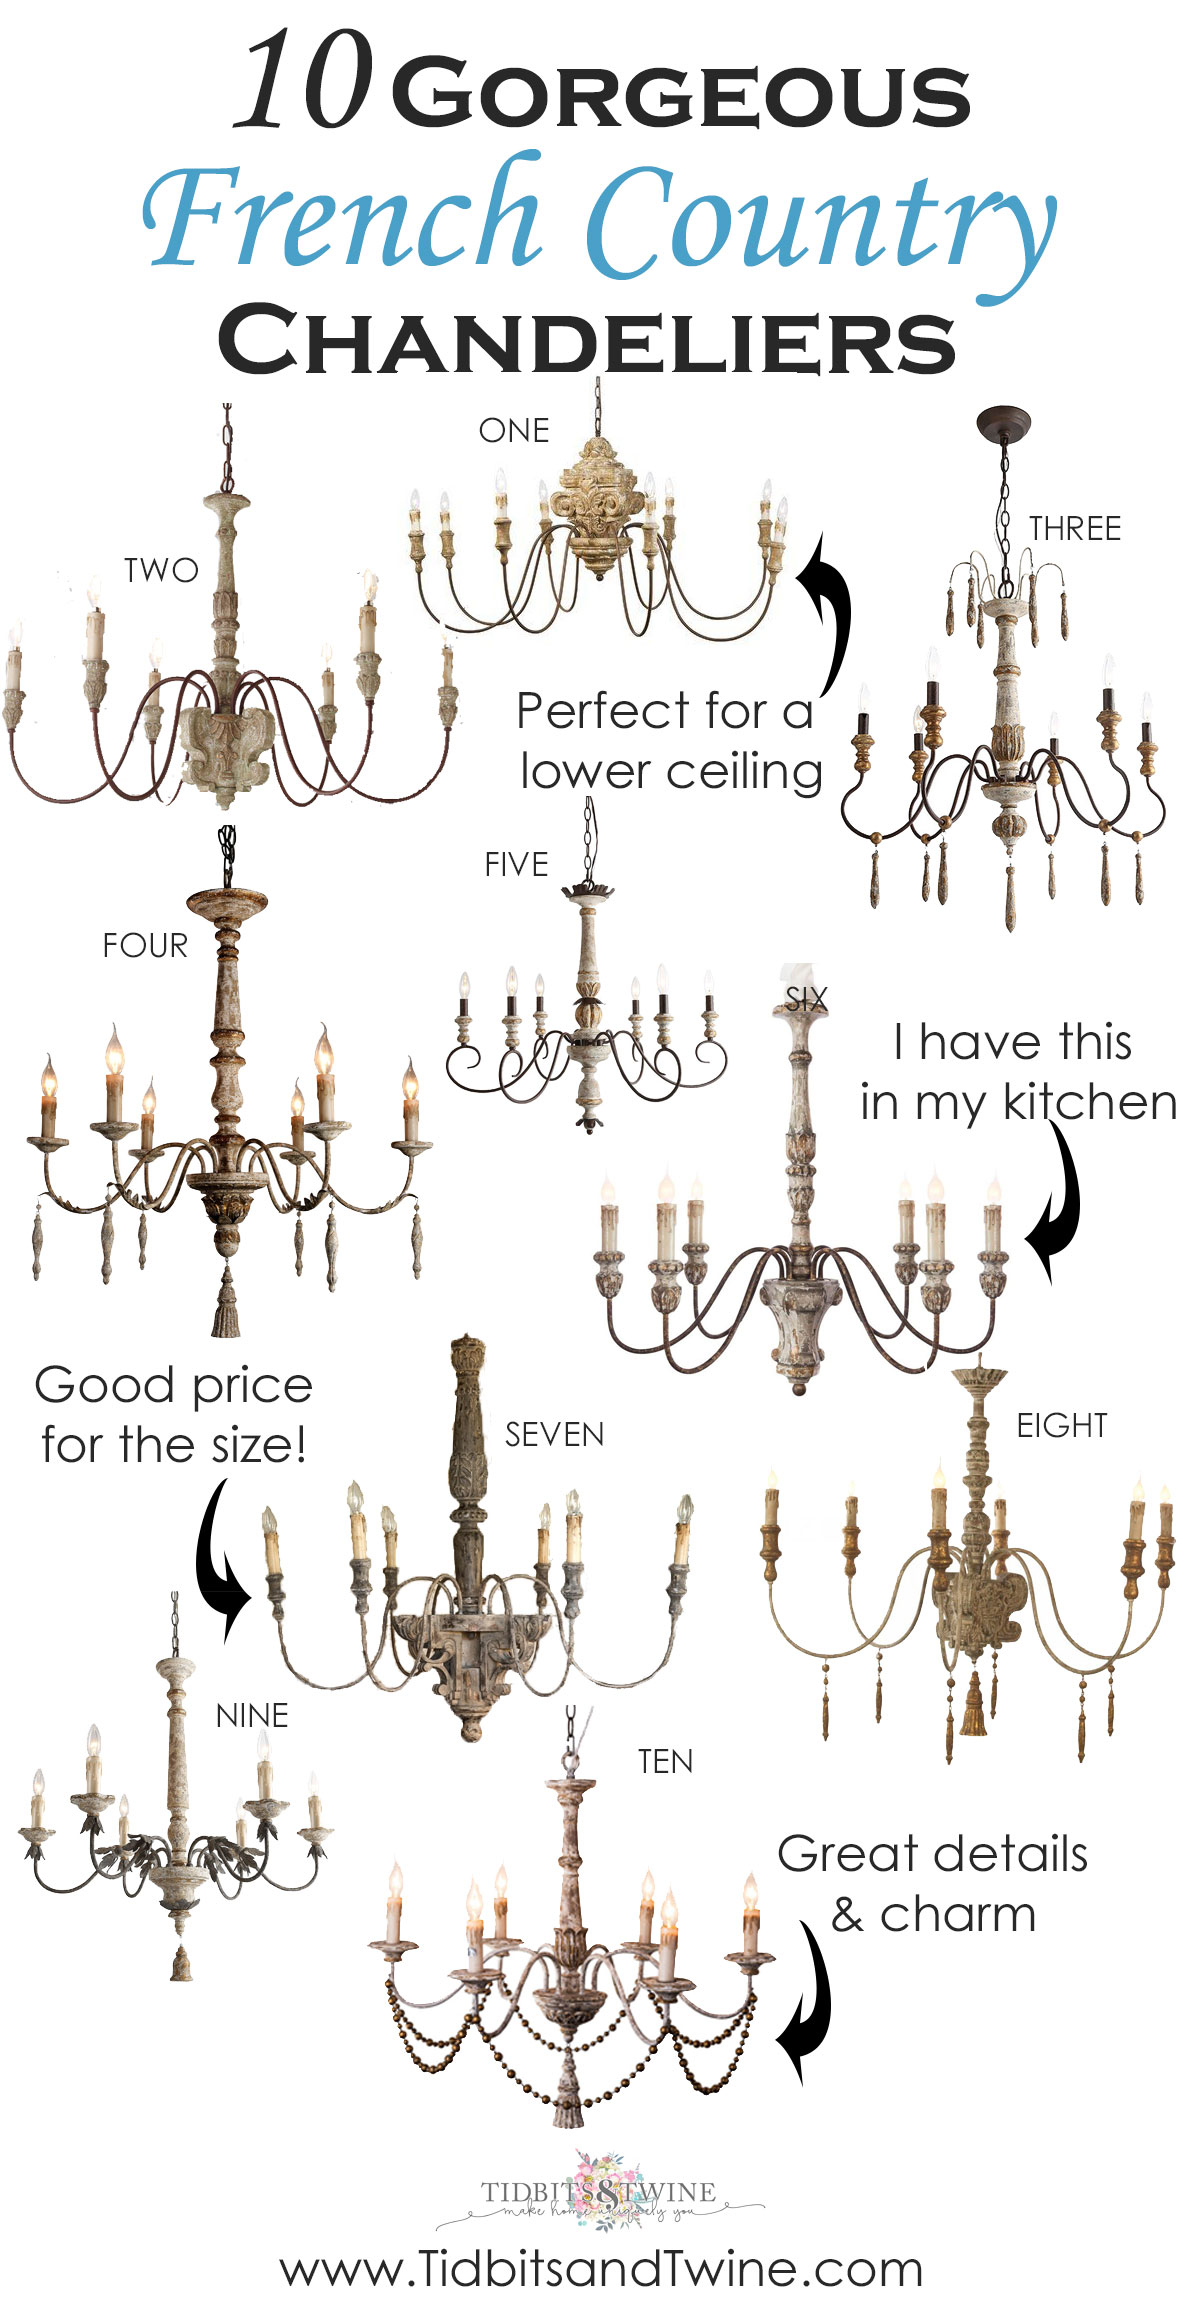 10 Gorgeous French Country Chandeliers with Rustic Charm